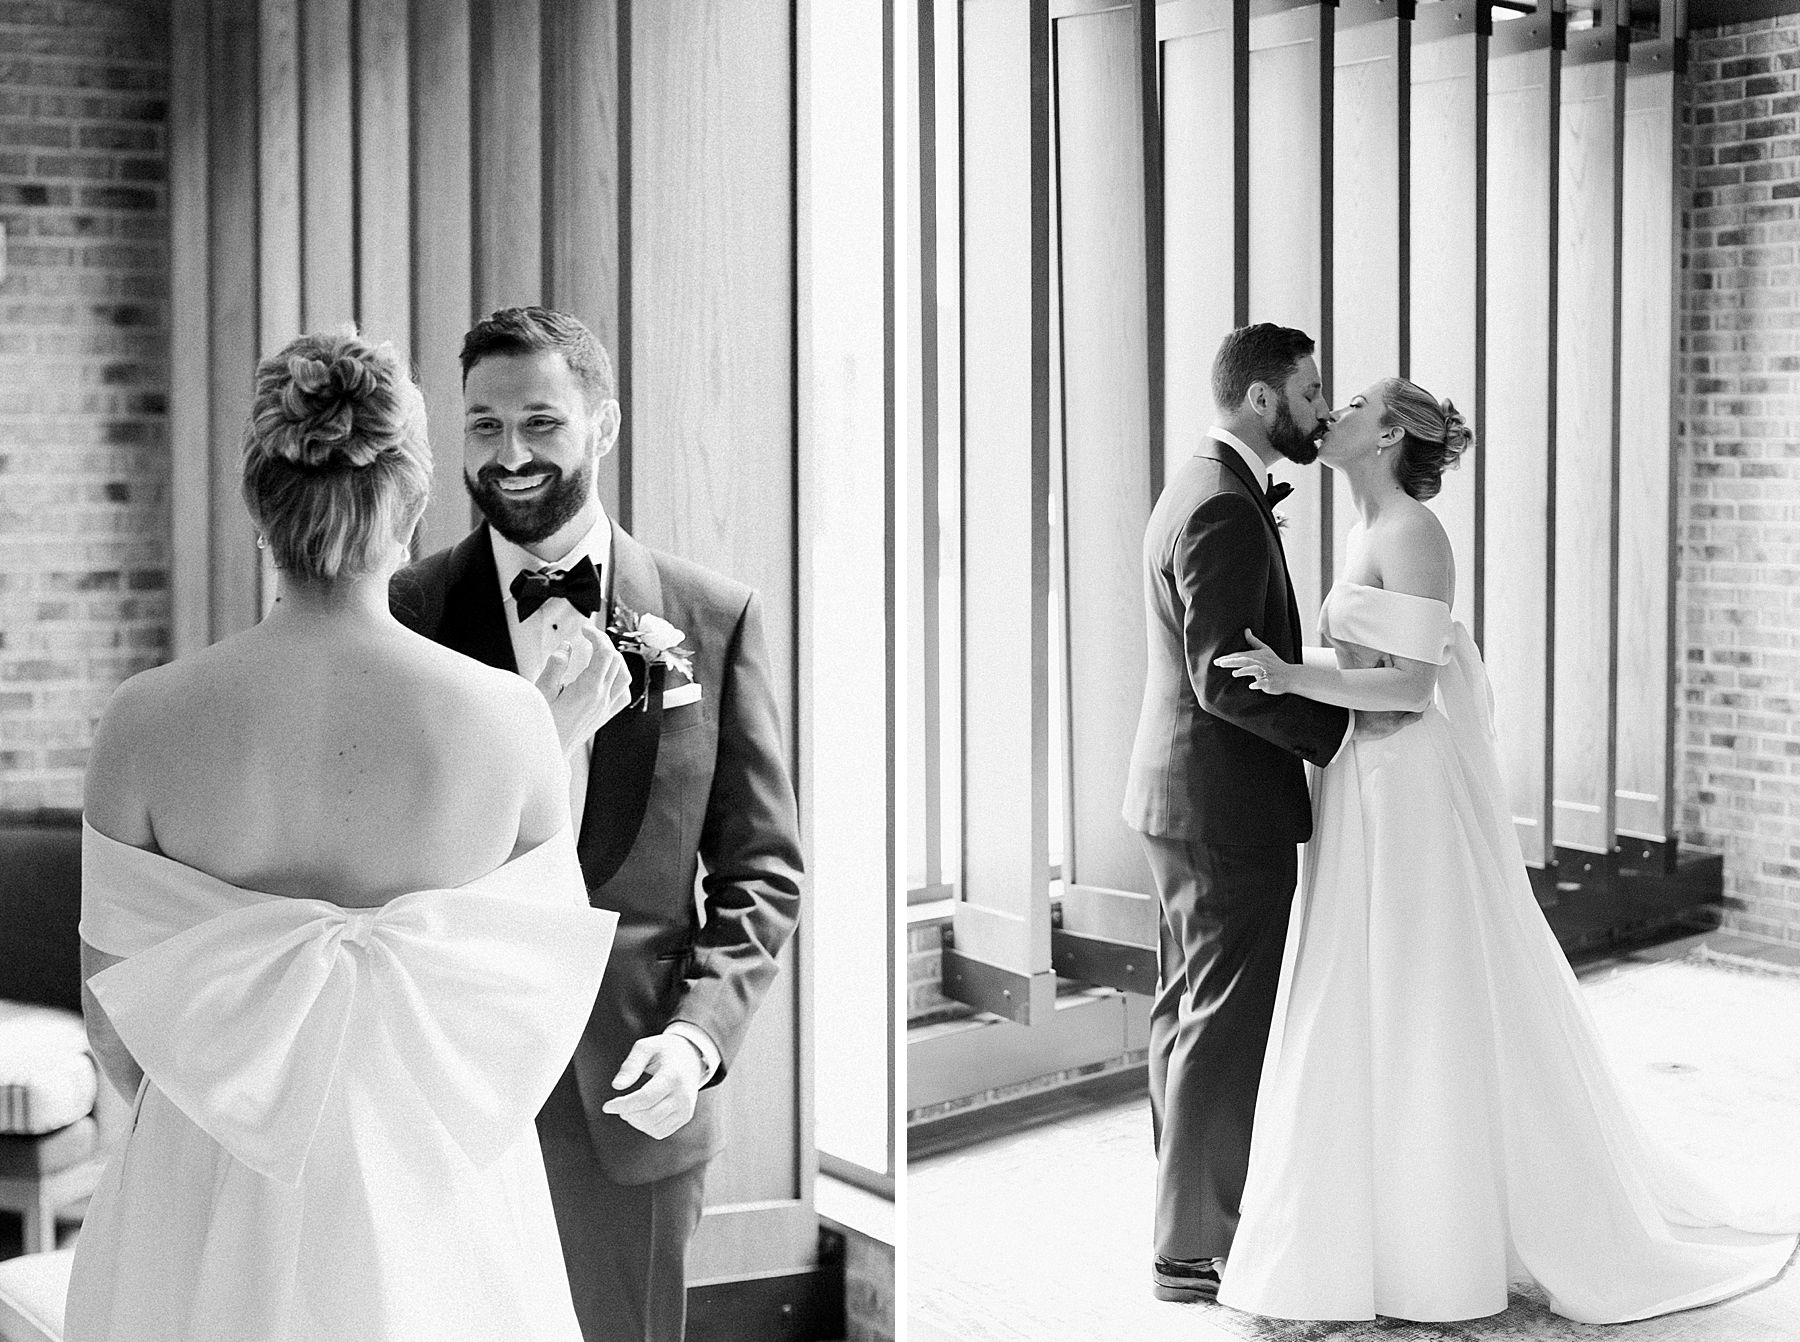 wedding couple first look surprise seeing each other for the first time on wedding day